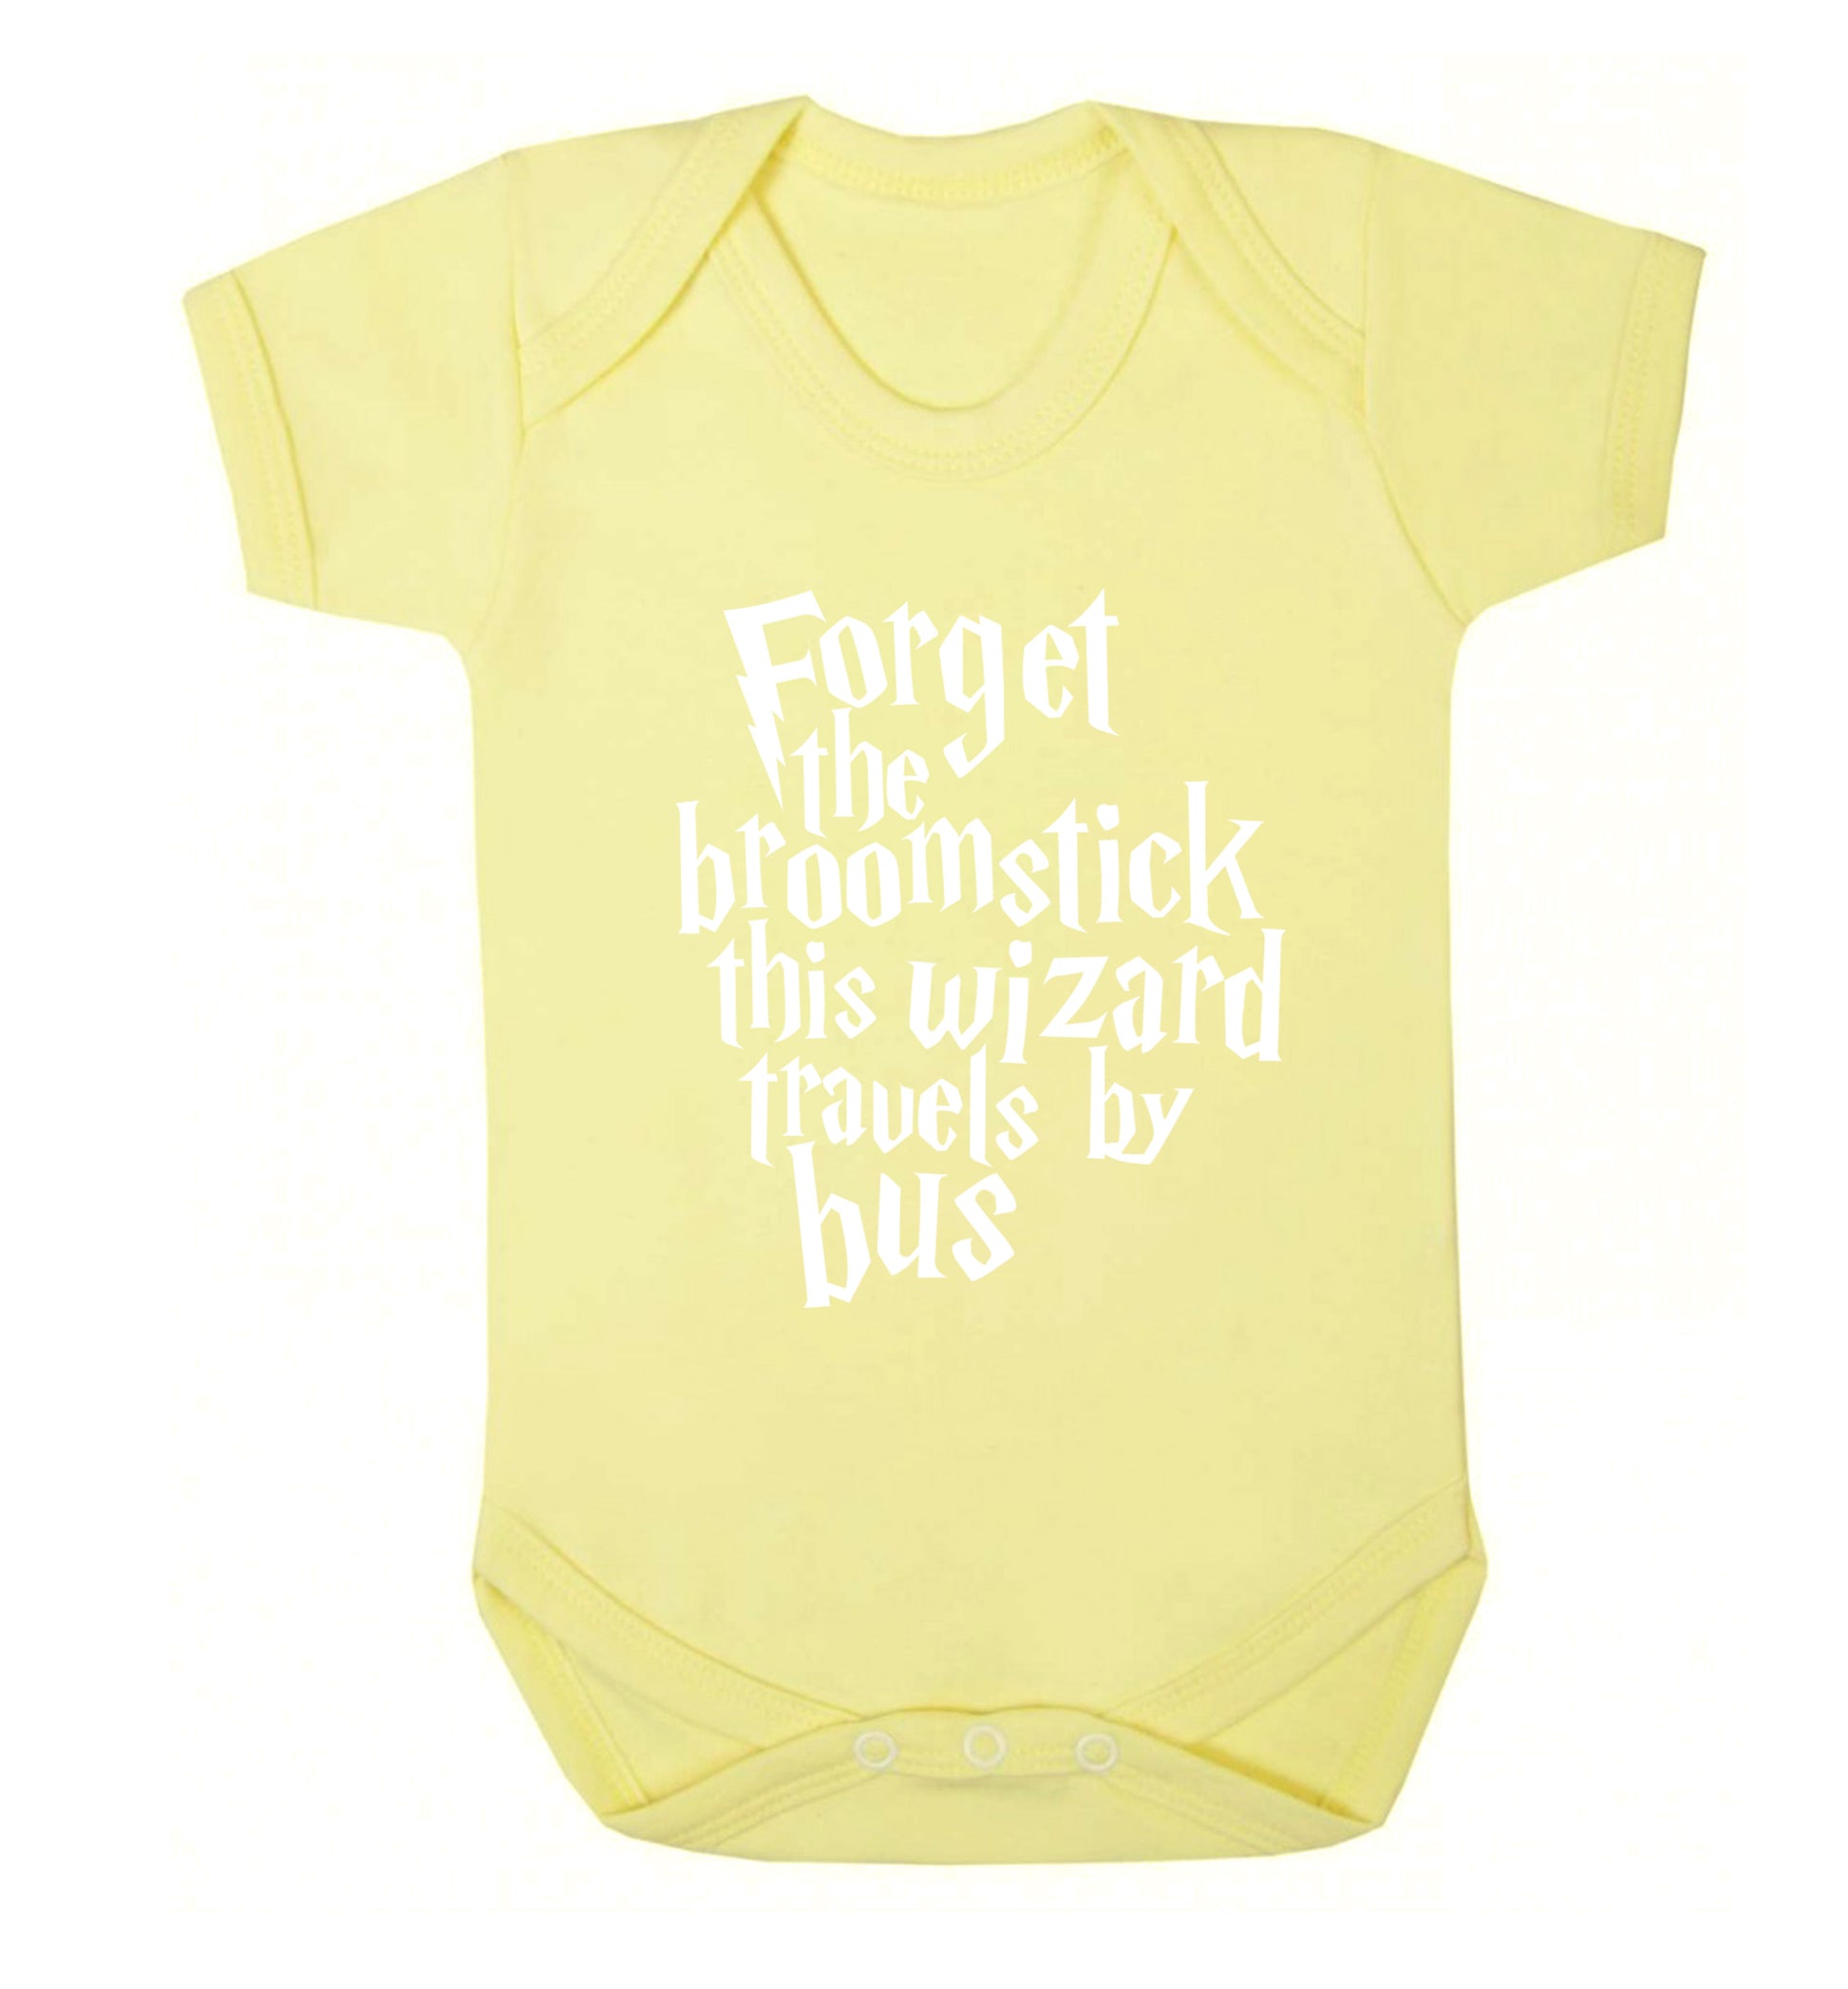 Forget the broomstick this wizard travels by bus Baby Vest pale yellow 18-24 months